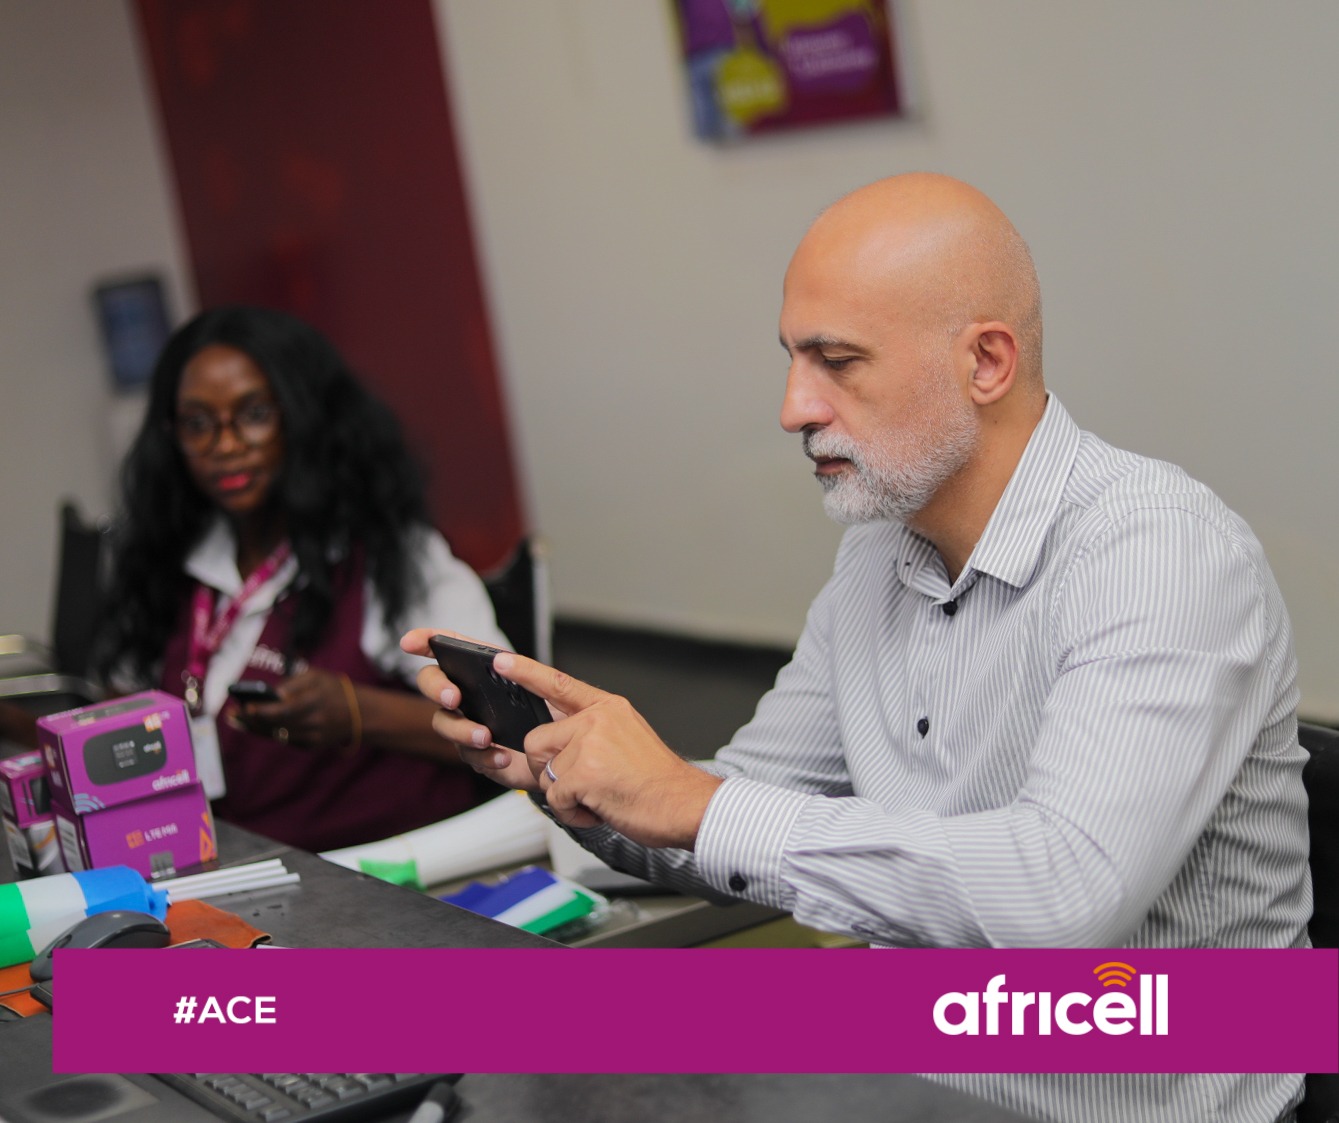 AFRICELL SL MD LEADS THE WAY IN CUSTOMER CARE WITH ACE INITIATIVE